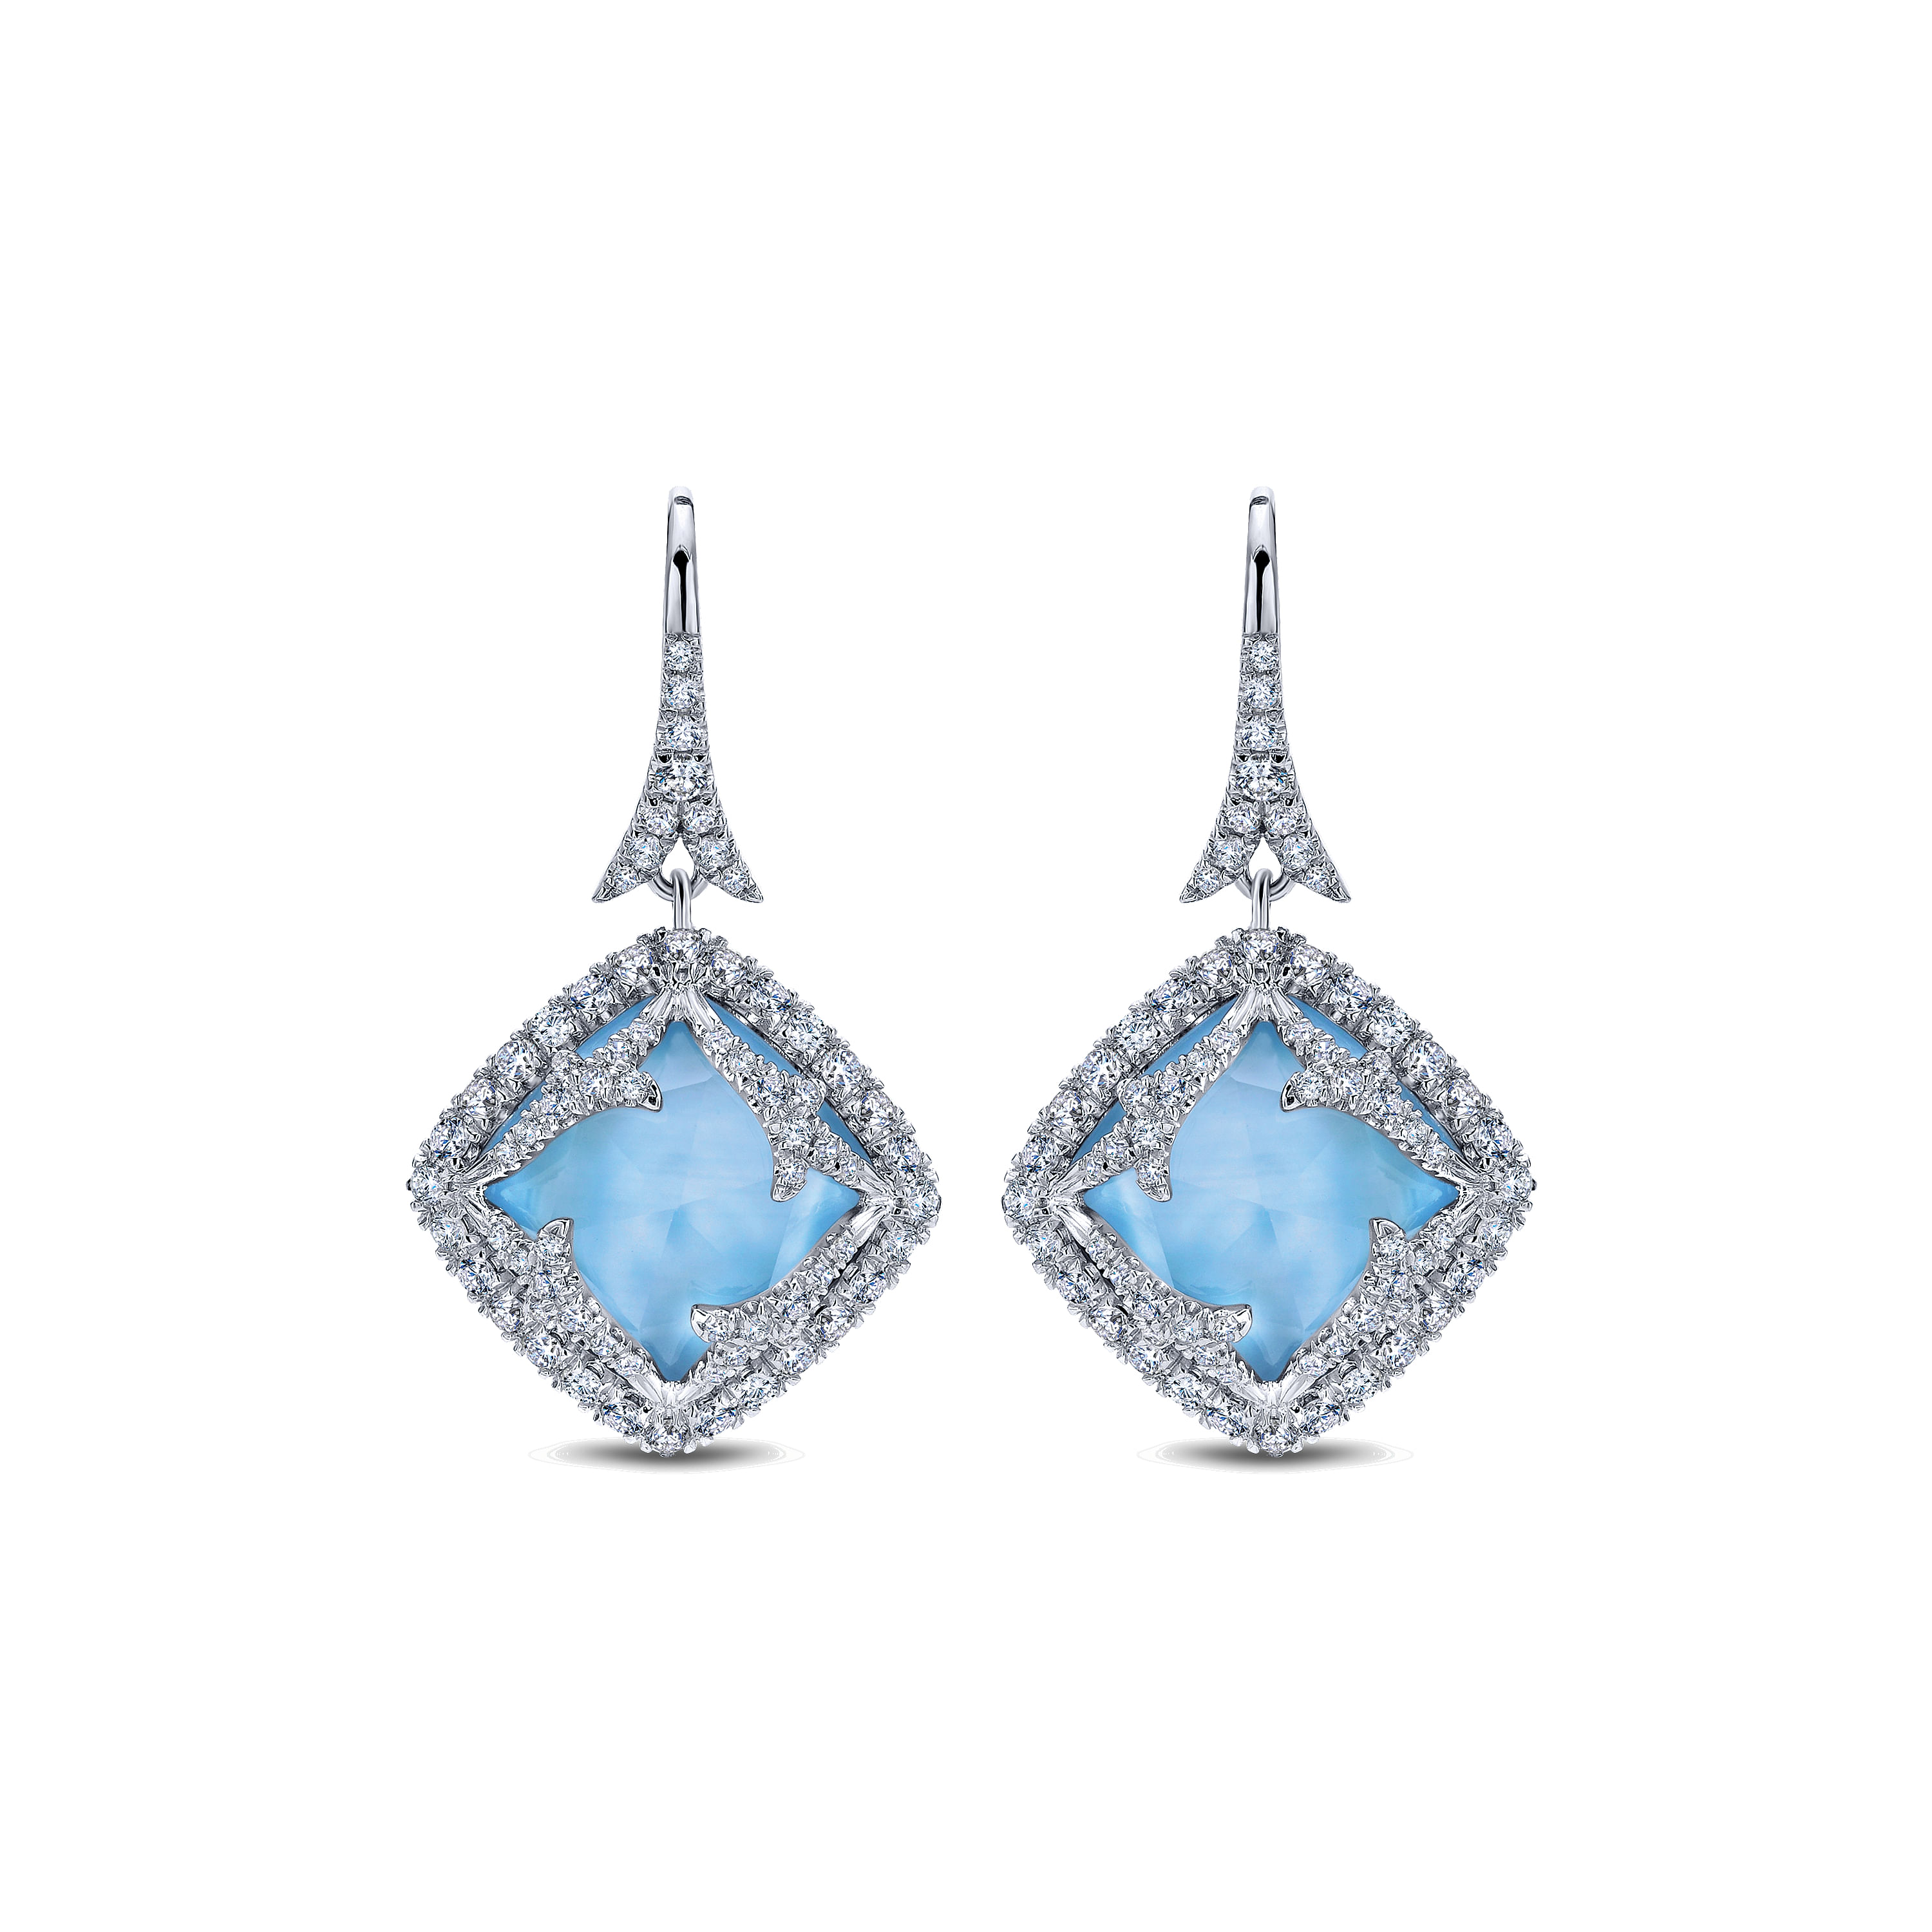 18K White Gold Rock Crystal/MOP/Turquoise Drop Earrings with Diamonds